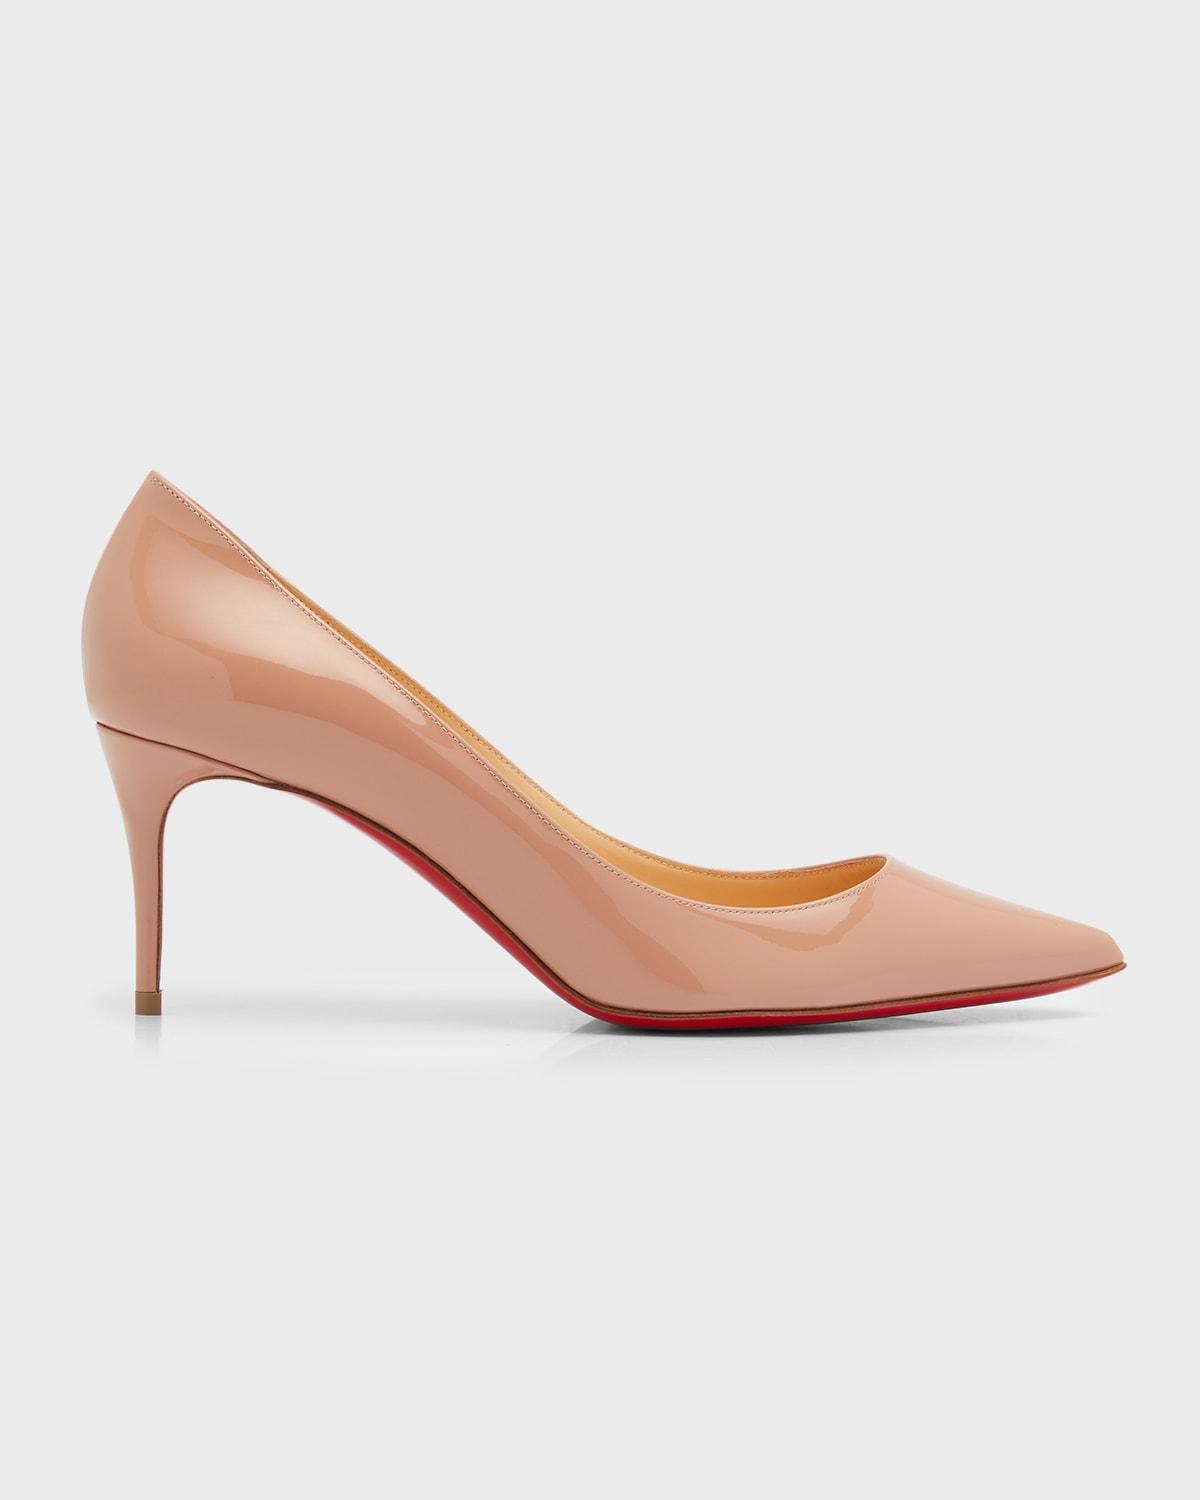 Christian Louboutin So Kate Psychic Pointed Toe Pump (Women